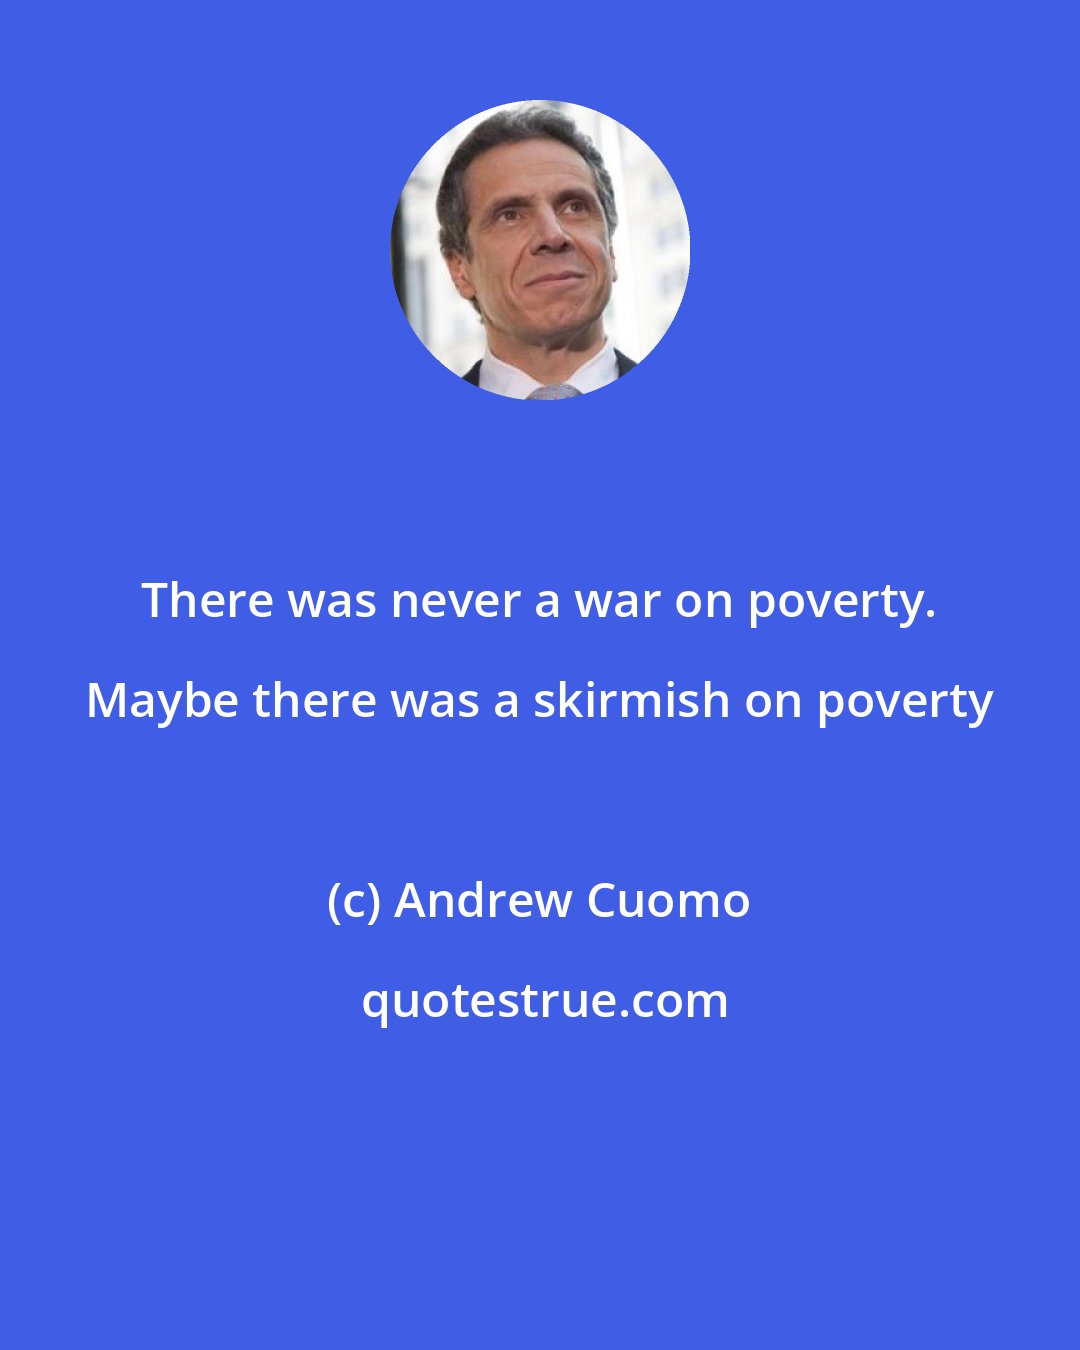 Andrew Cuomo: There was never a war on poverty. Maybe there was a skirmish on poverty